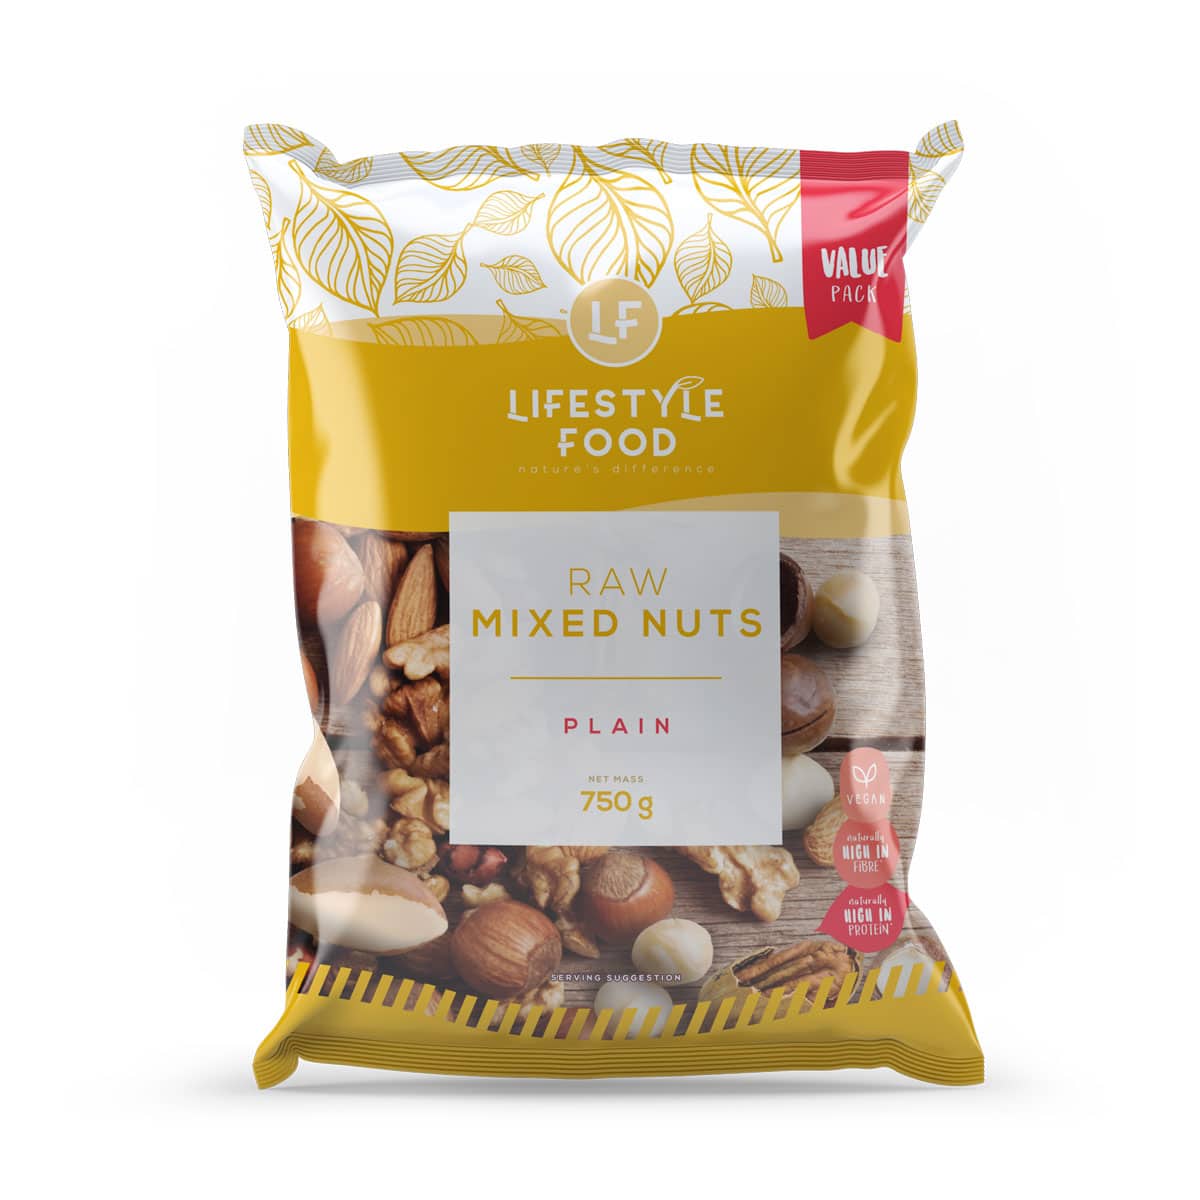 Lifestyle Food Raw Mixed Nuts Value Pack - 750g